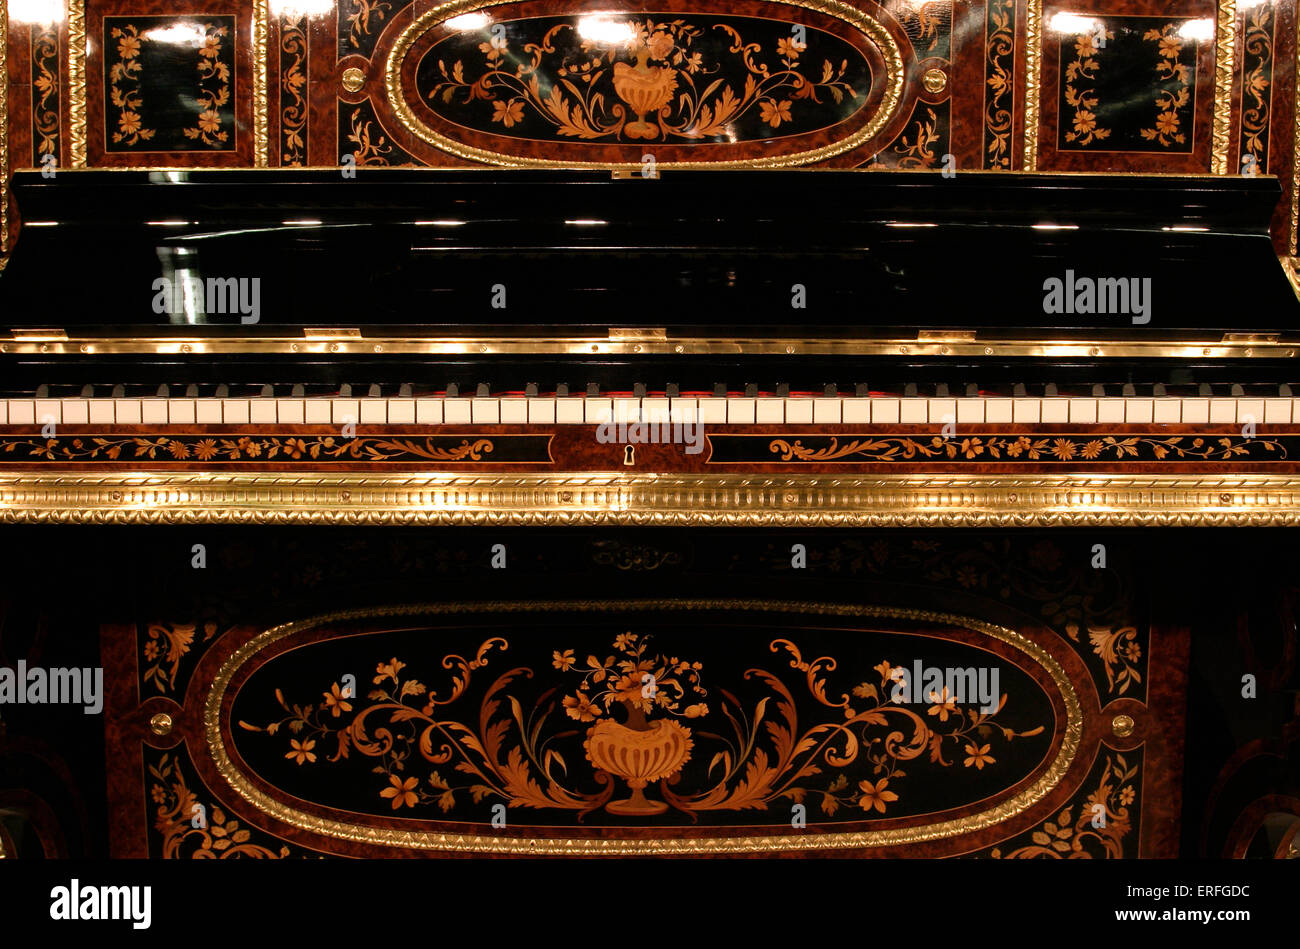 Upright piano, highly decorated using Burr wood and inlays. Stock Photo